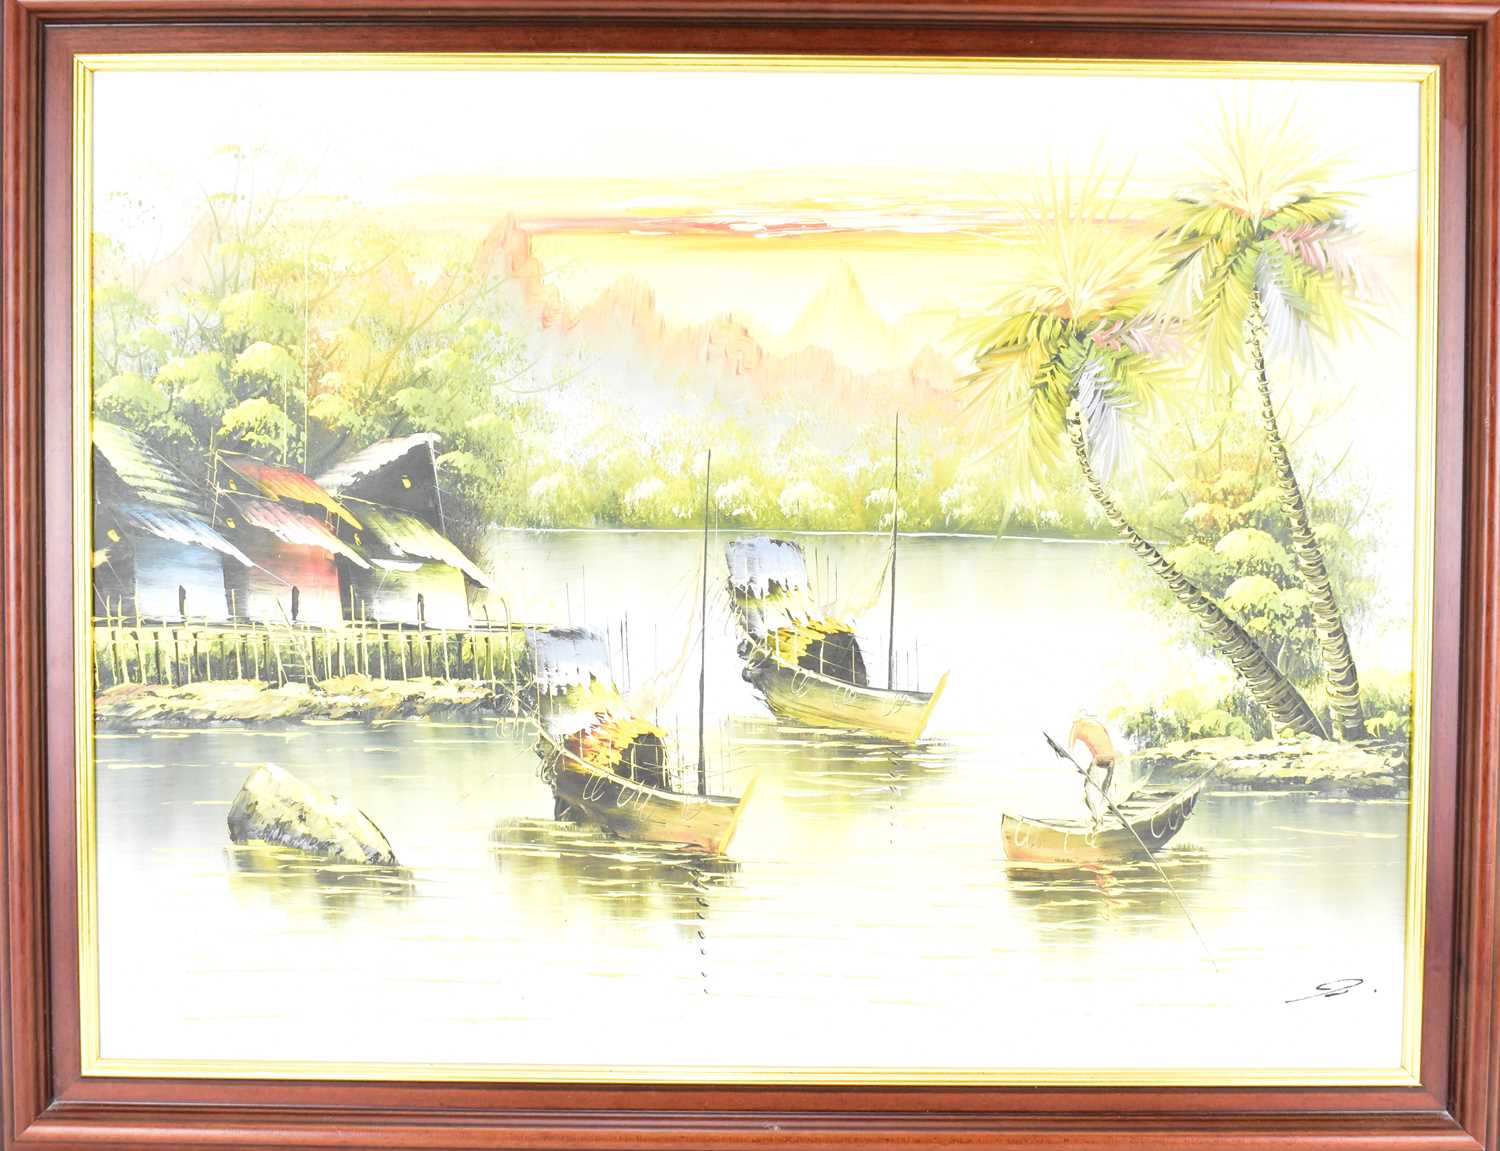 Two acrylics on canvas depicting Far Eastern boats on river scenes, signed lower right, each 45 x - Image 3 of 3